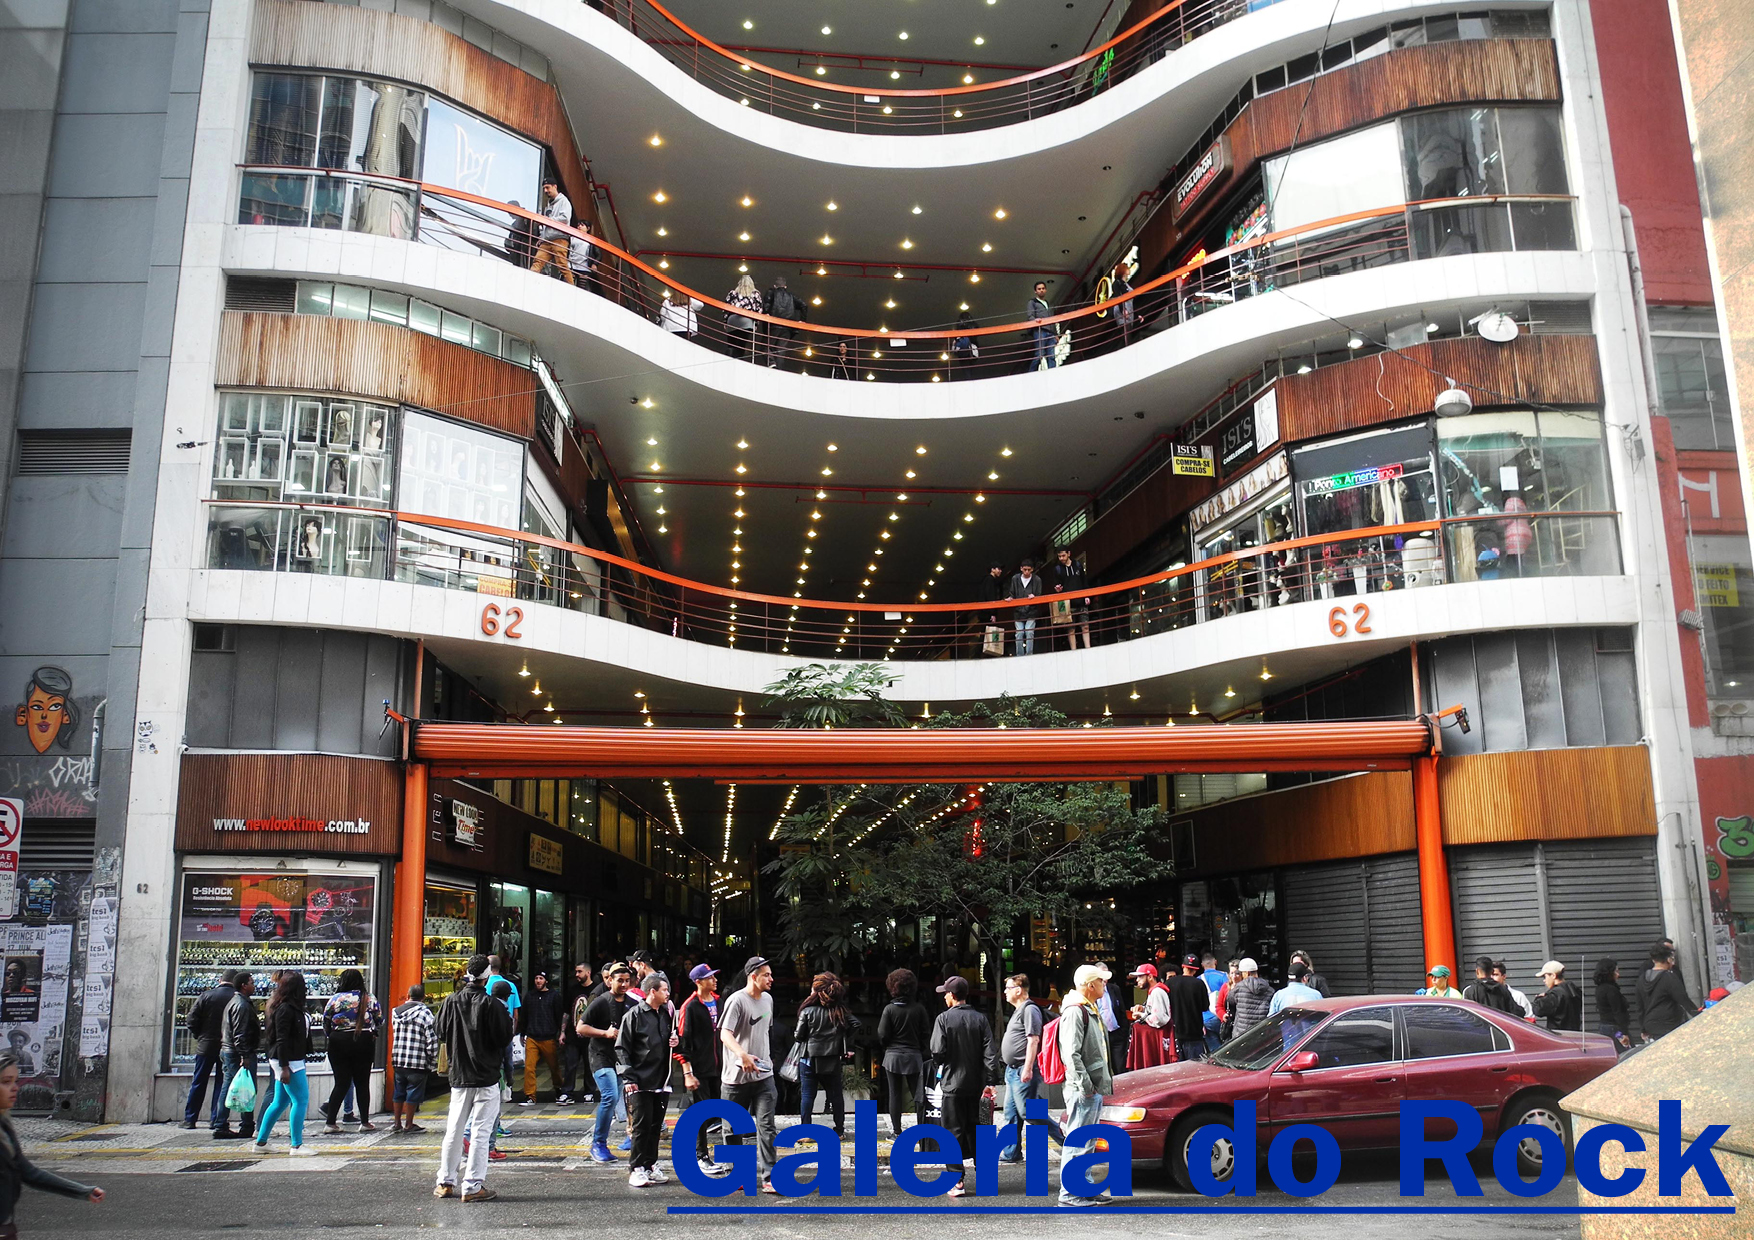 Galeria do Rock (Rock Gallery) Shopping Mall in Dowtown Sao Paulo